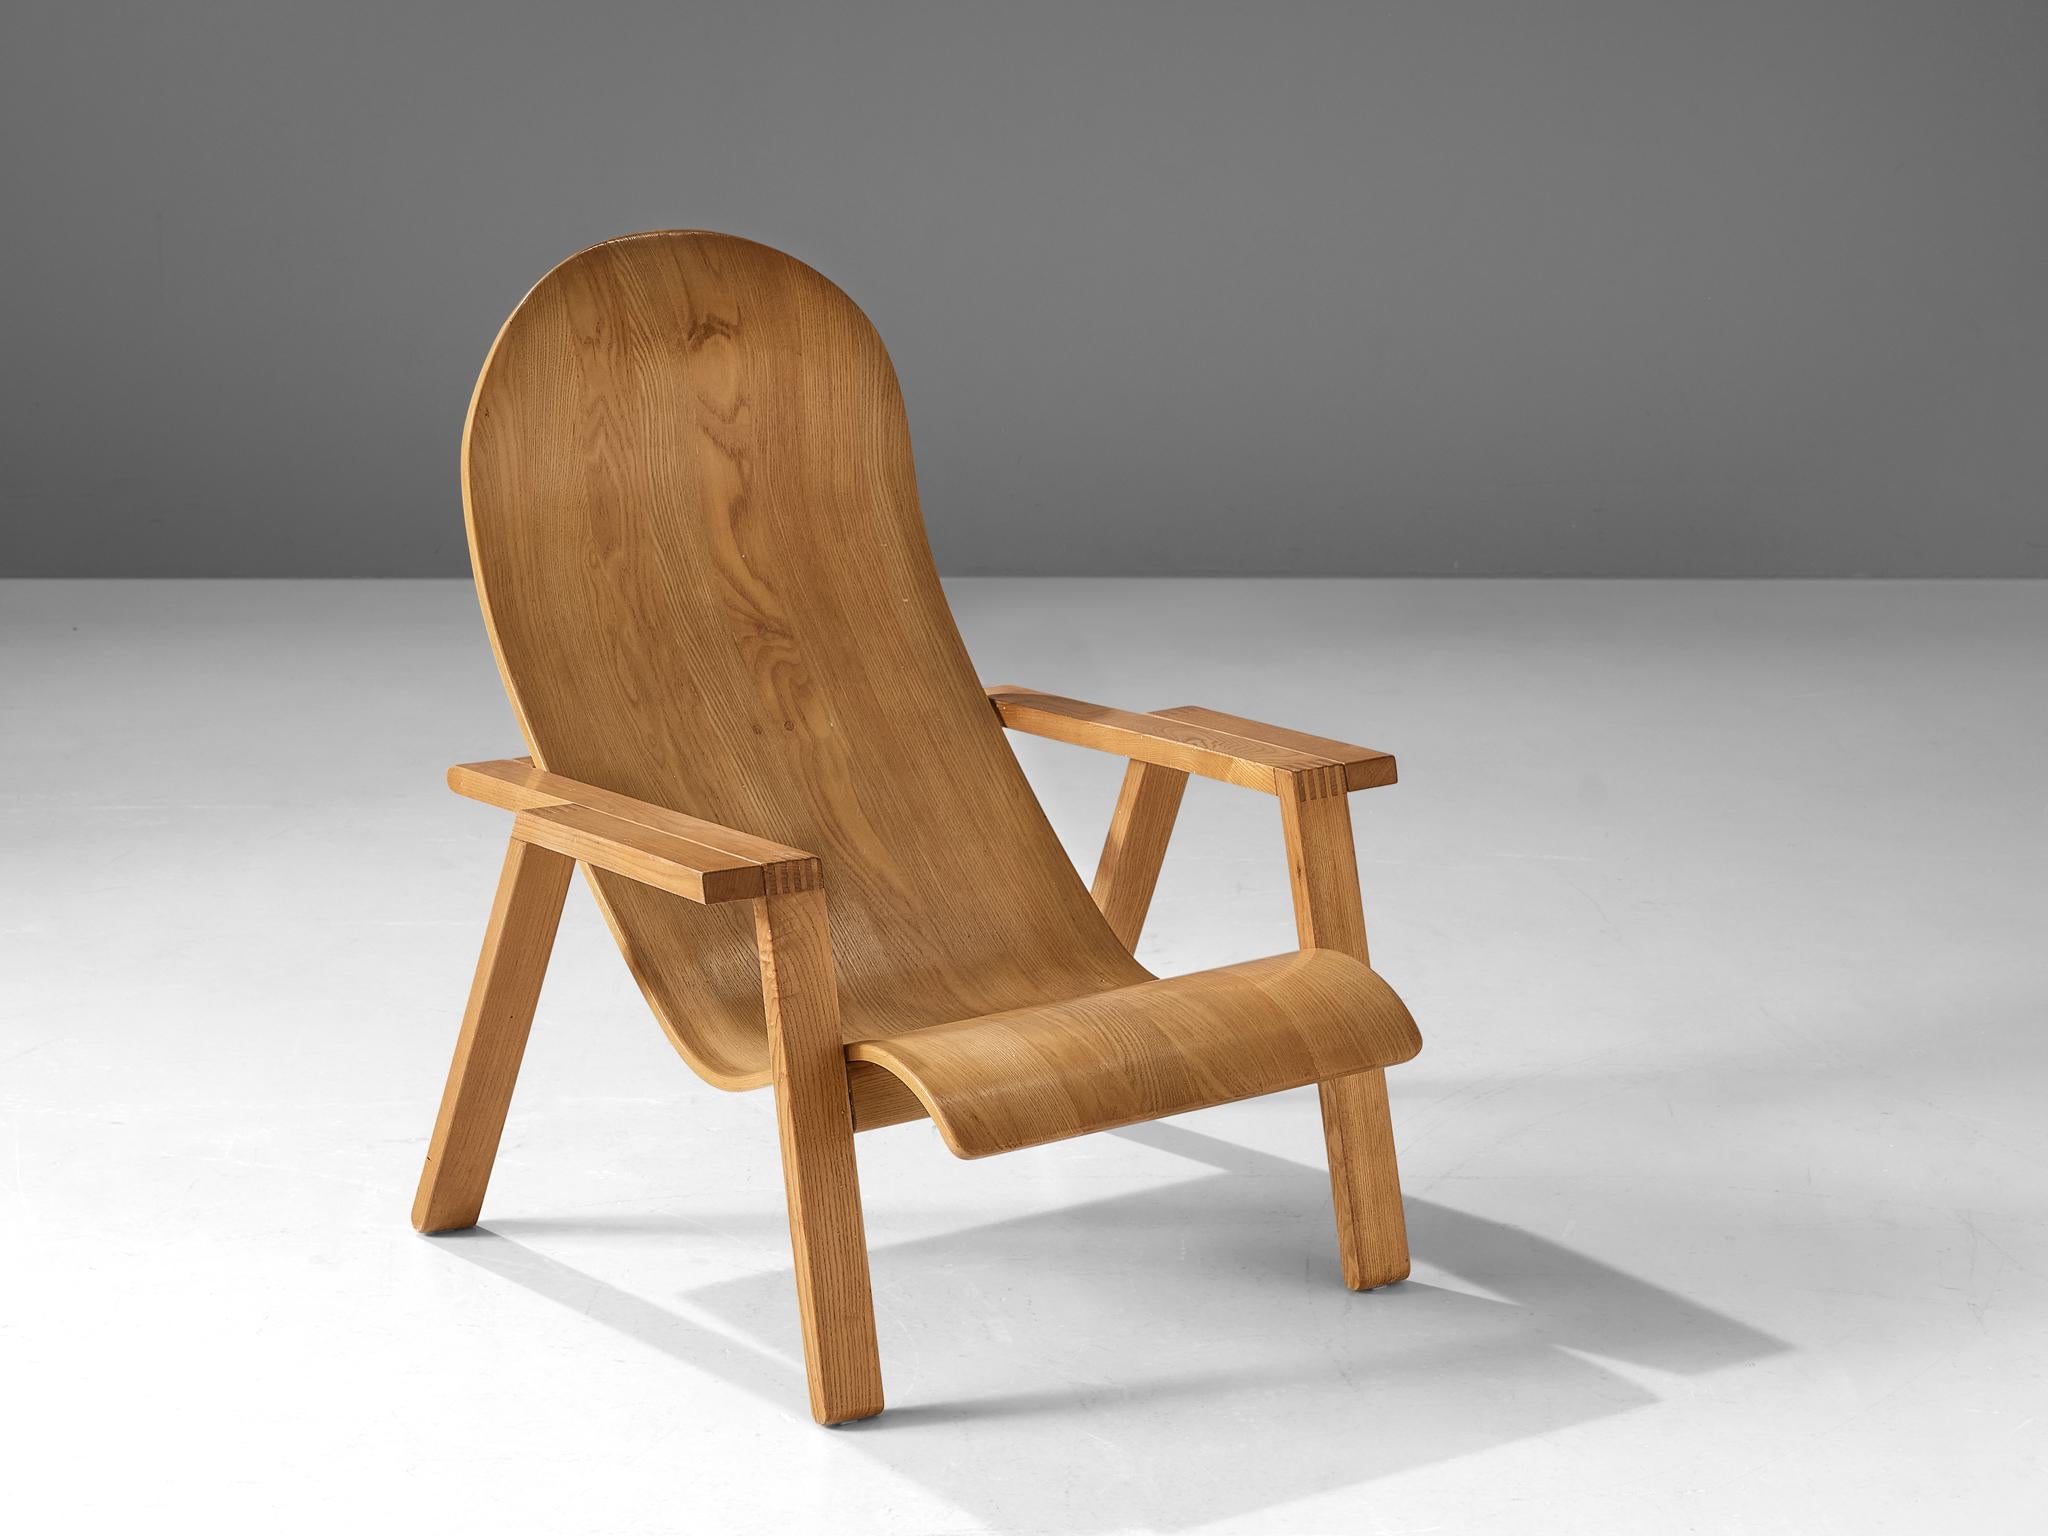 Renato Toso & Roberto Pamio for Stilwood, ´Linda´ lounge chair, laminated ash, Italy, 1970s

Lounge chair model ´Linda´ in laminated ash designed by the Italian designers Renato Toso and Roberto Pamio for Stilwood. The application of plywood made